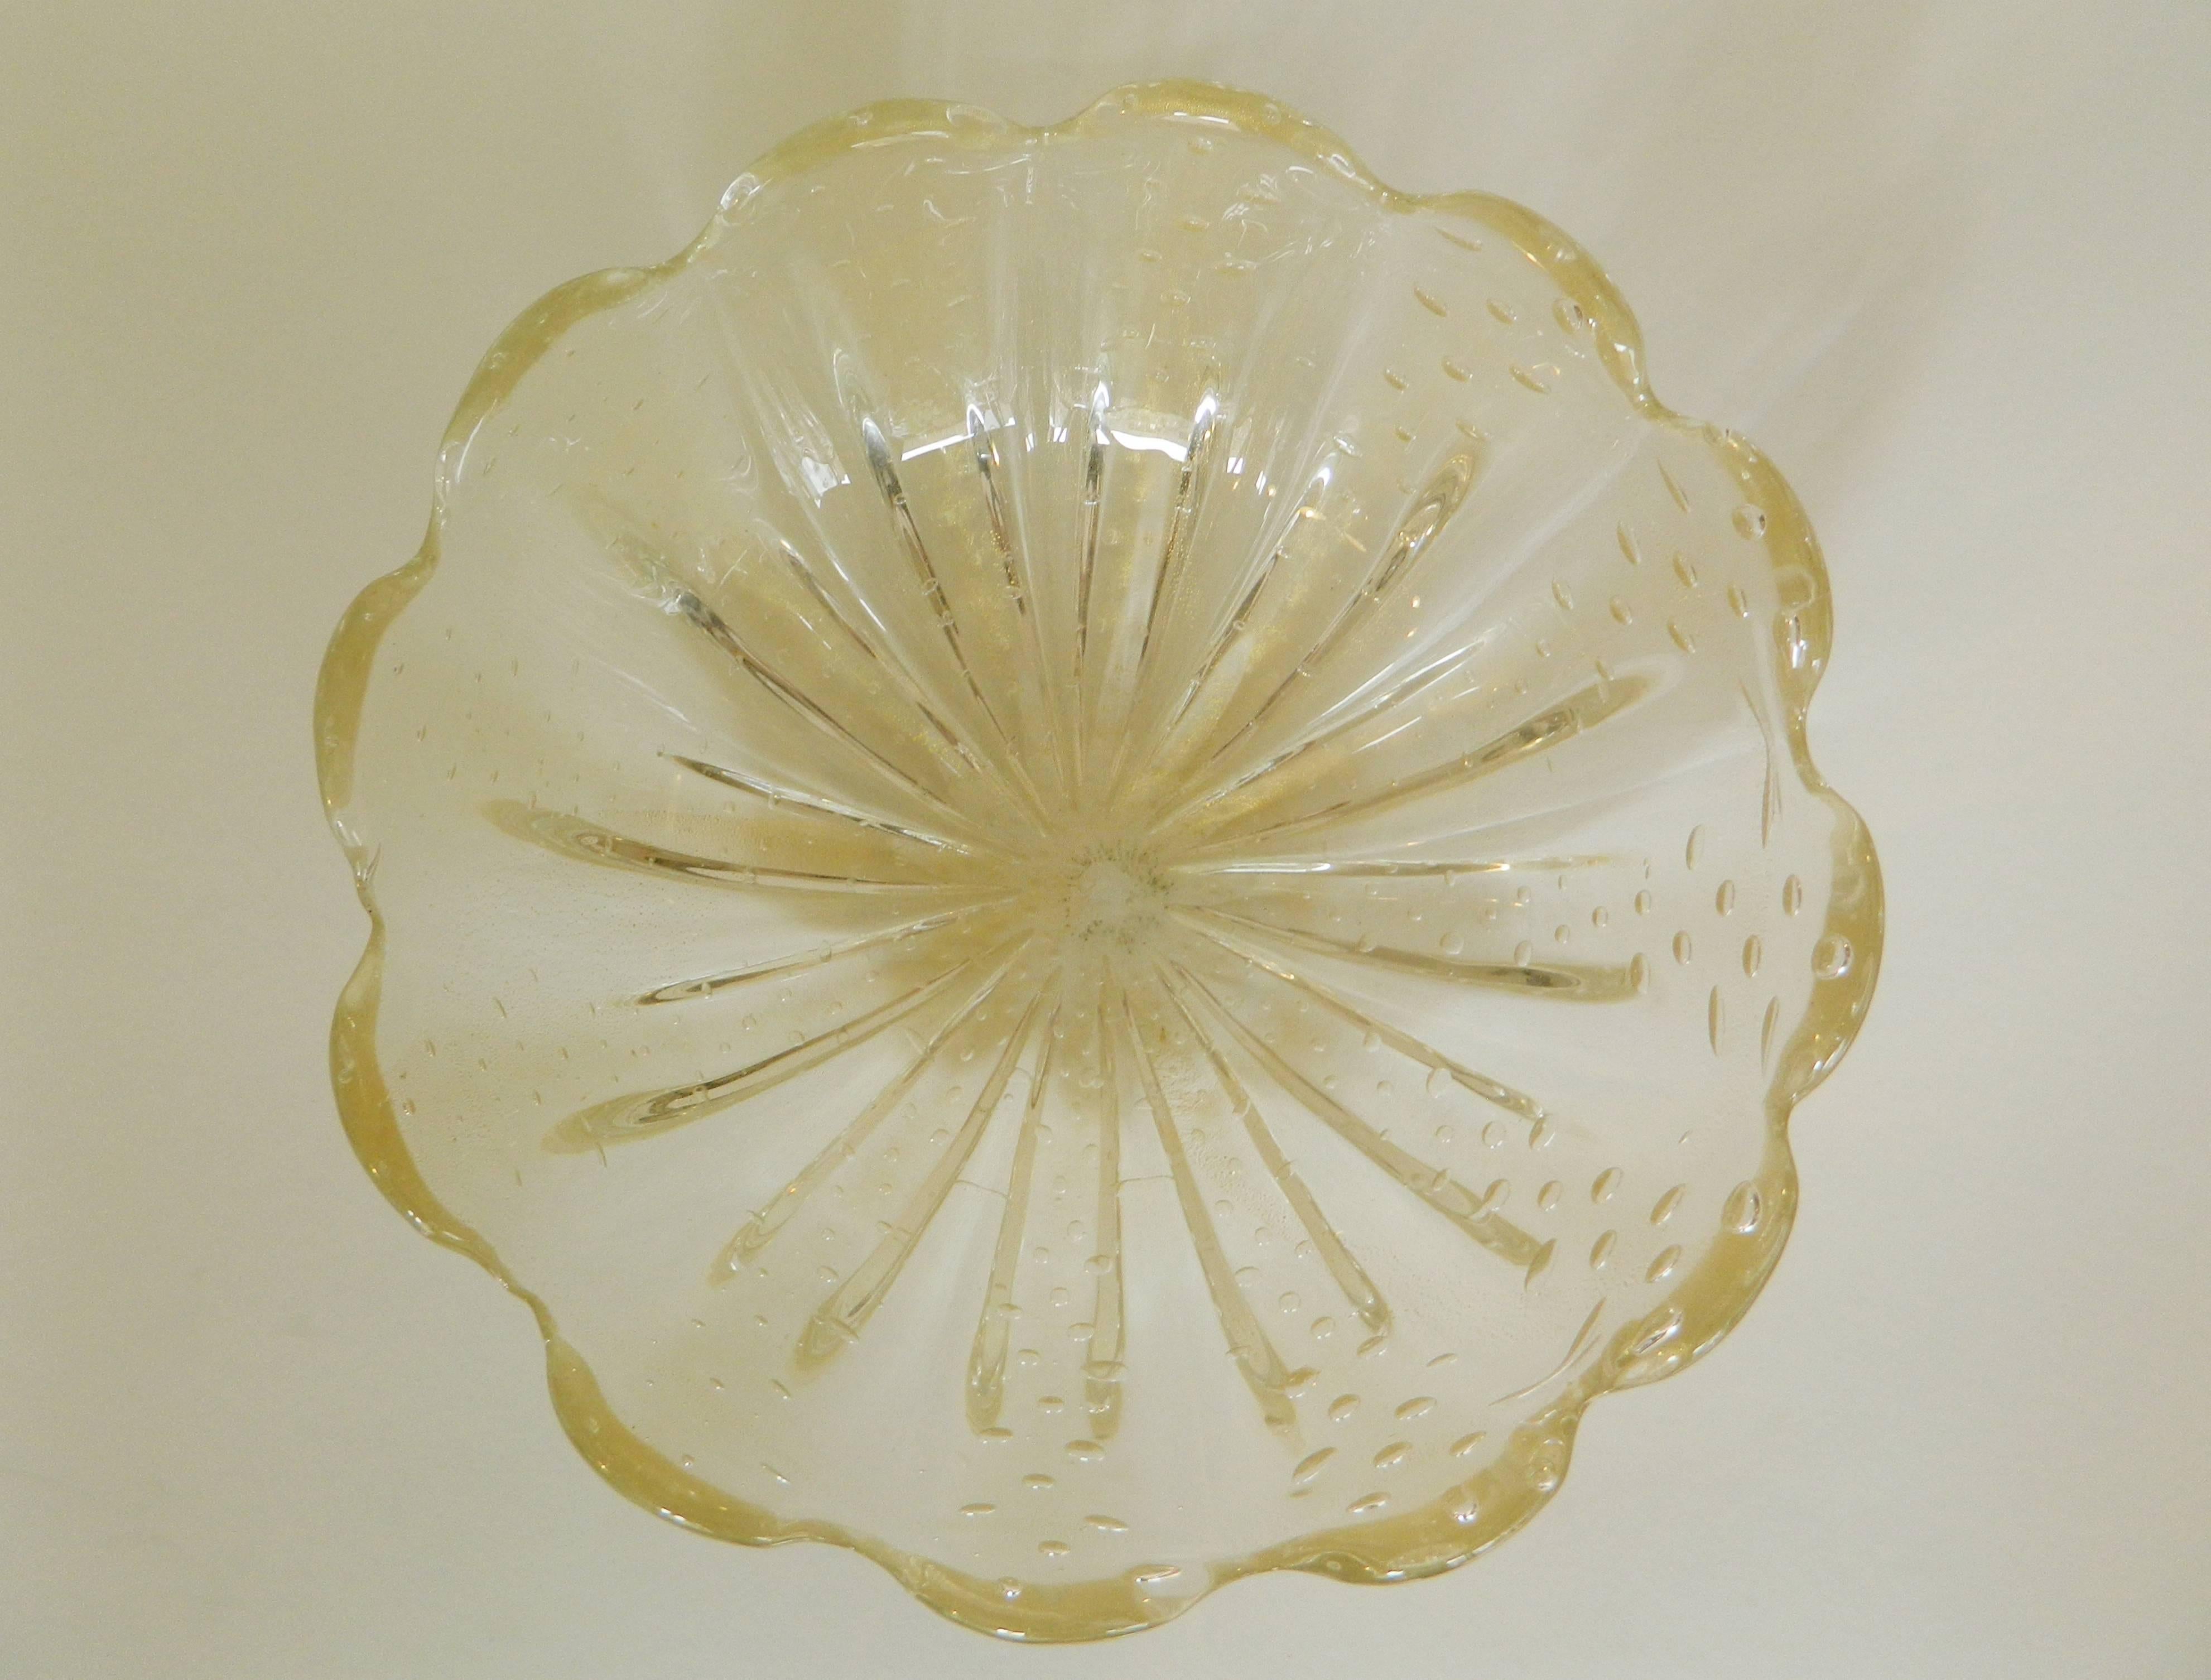 Italian Mid-20th Century Murano Glass Bowl with Gold Flakes For Sale